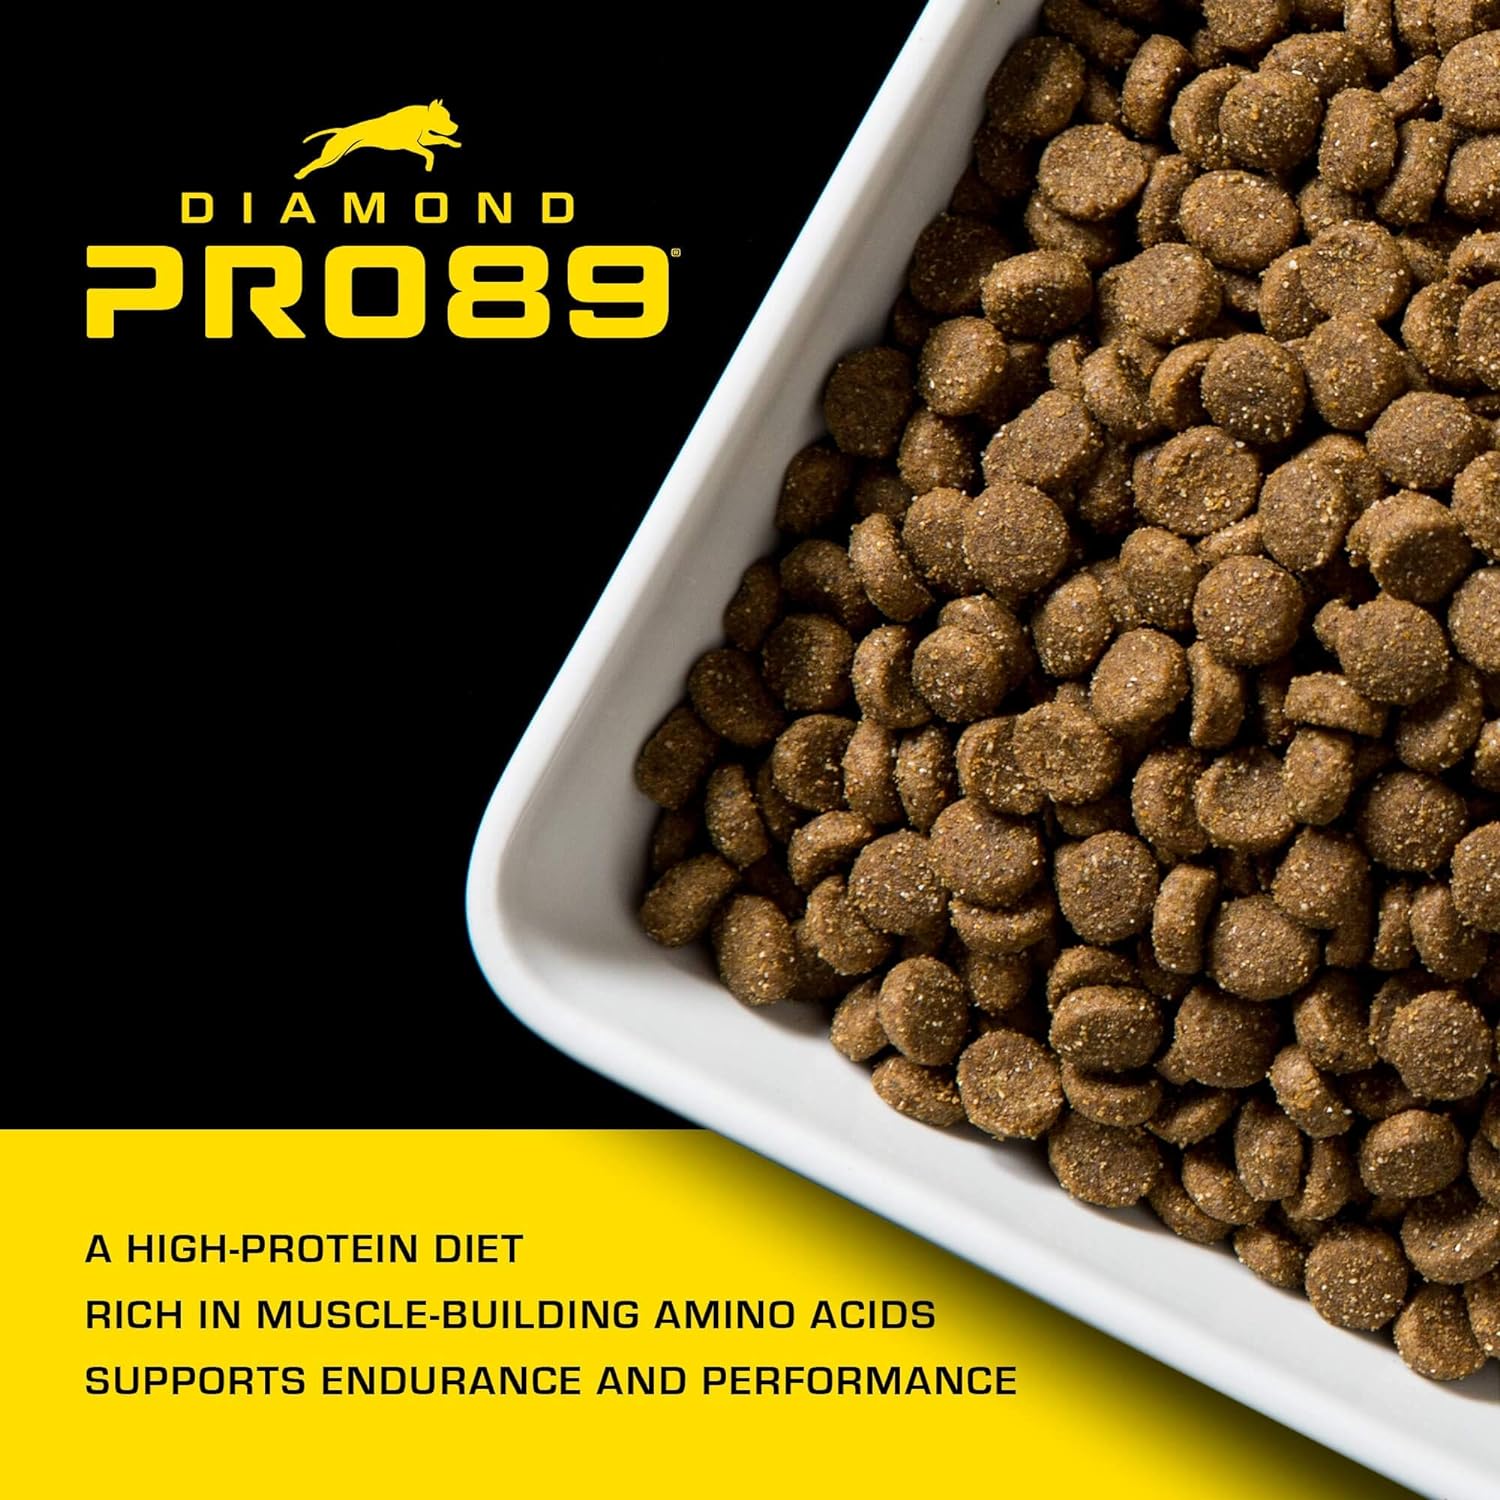 Diamond Pro89 Beef, Pork & Ancient Grains Formula for Adult Dogs Dry Dog Food – Gallery Image 3